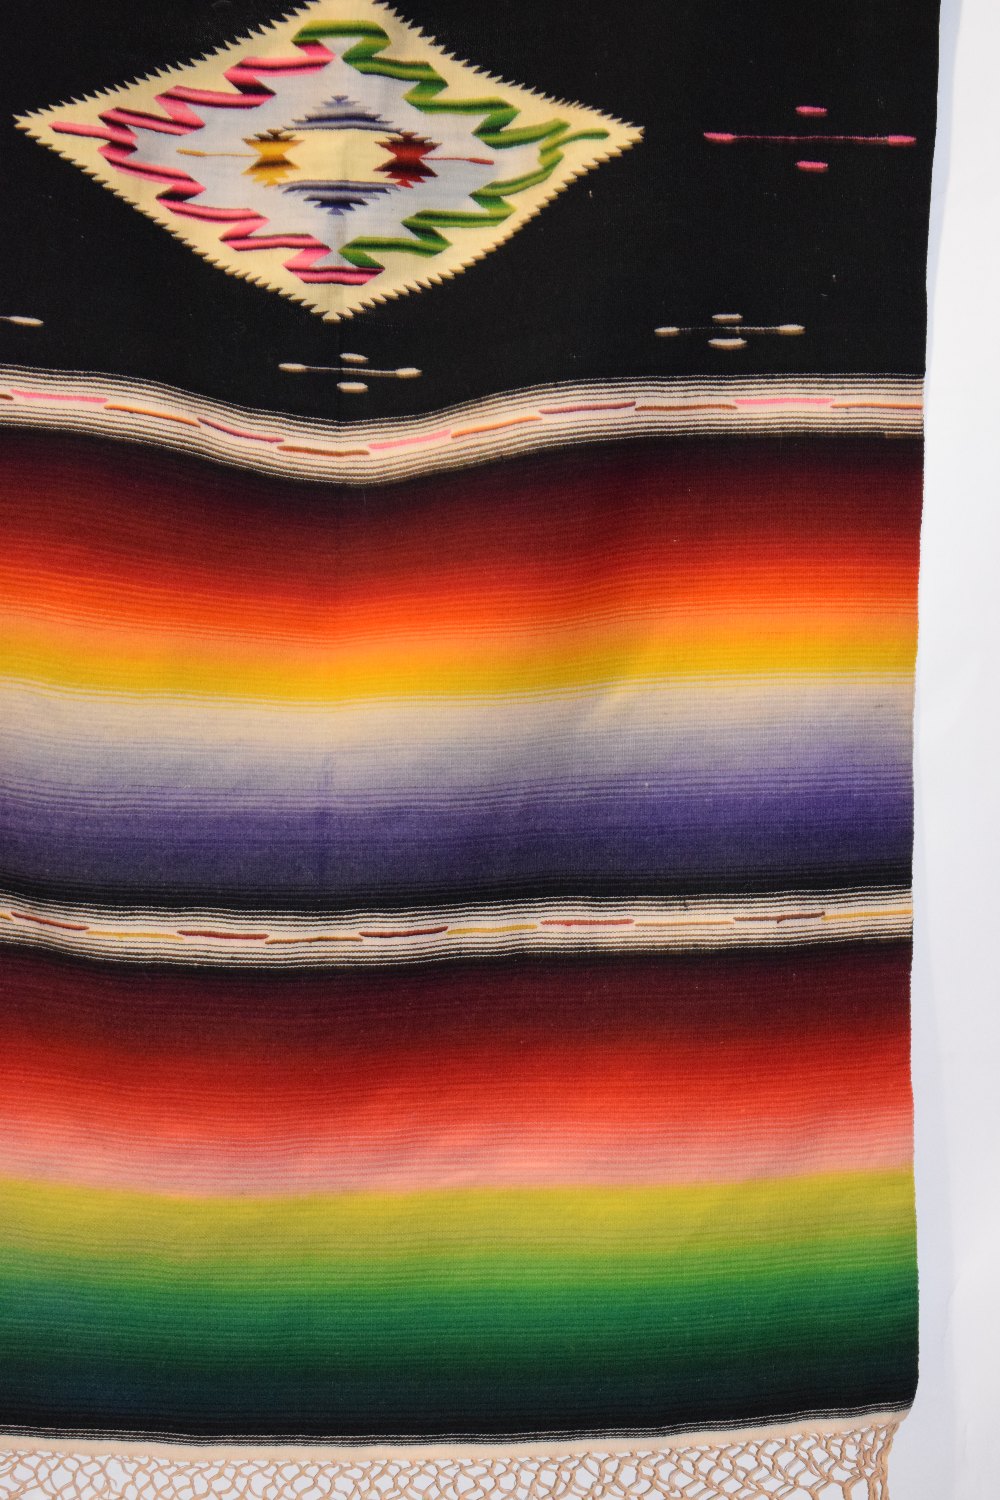 Mexican serape blanket, north America, mid-20th century, 68in. X 32in. 1.73m. X 0.81m. Woven in - Image 2 of 7